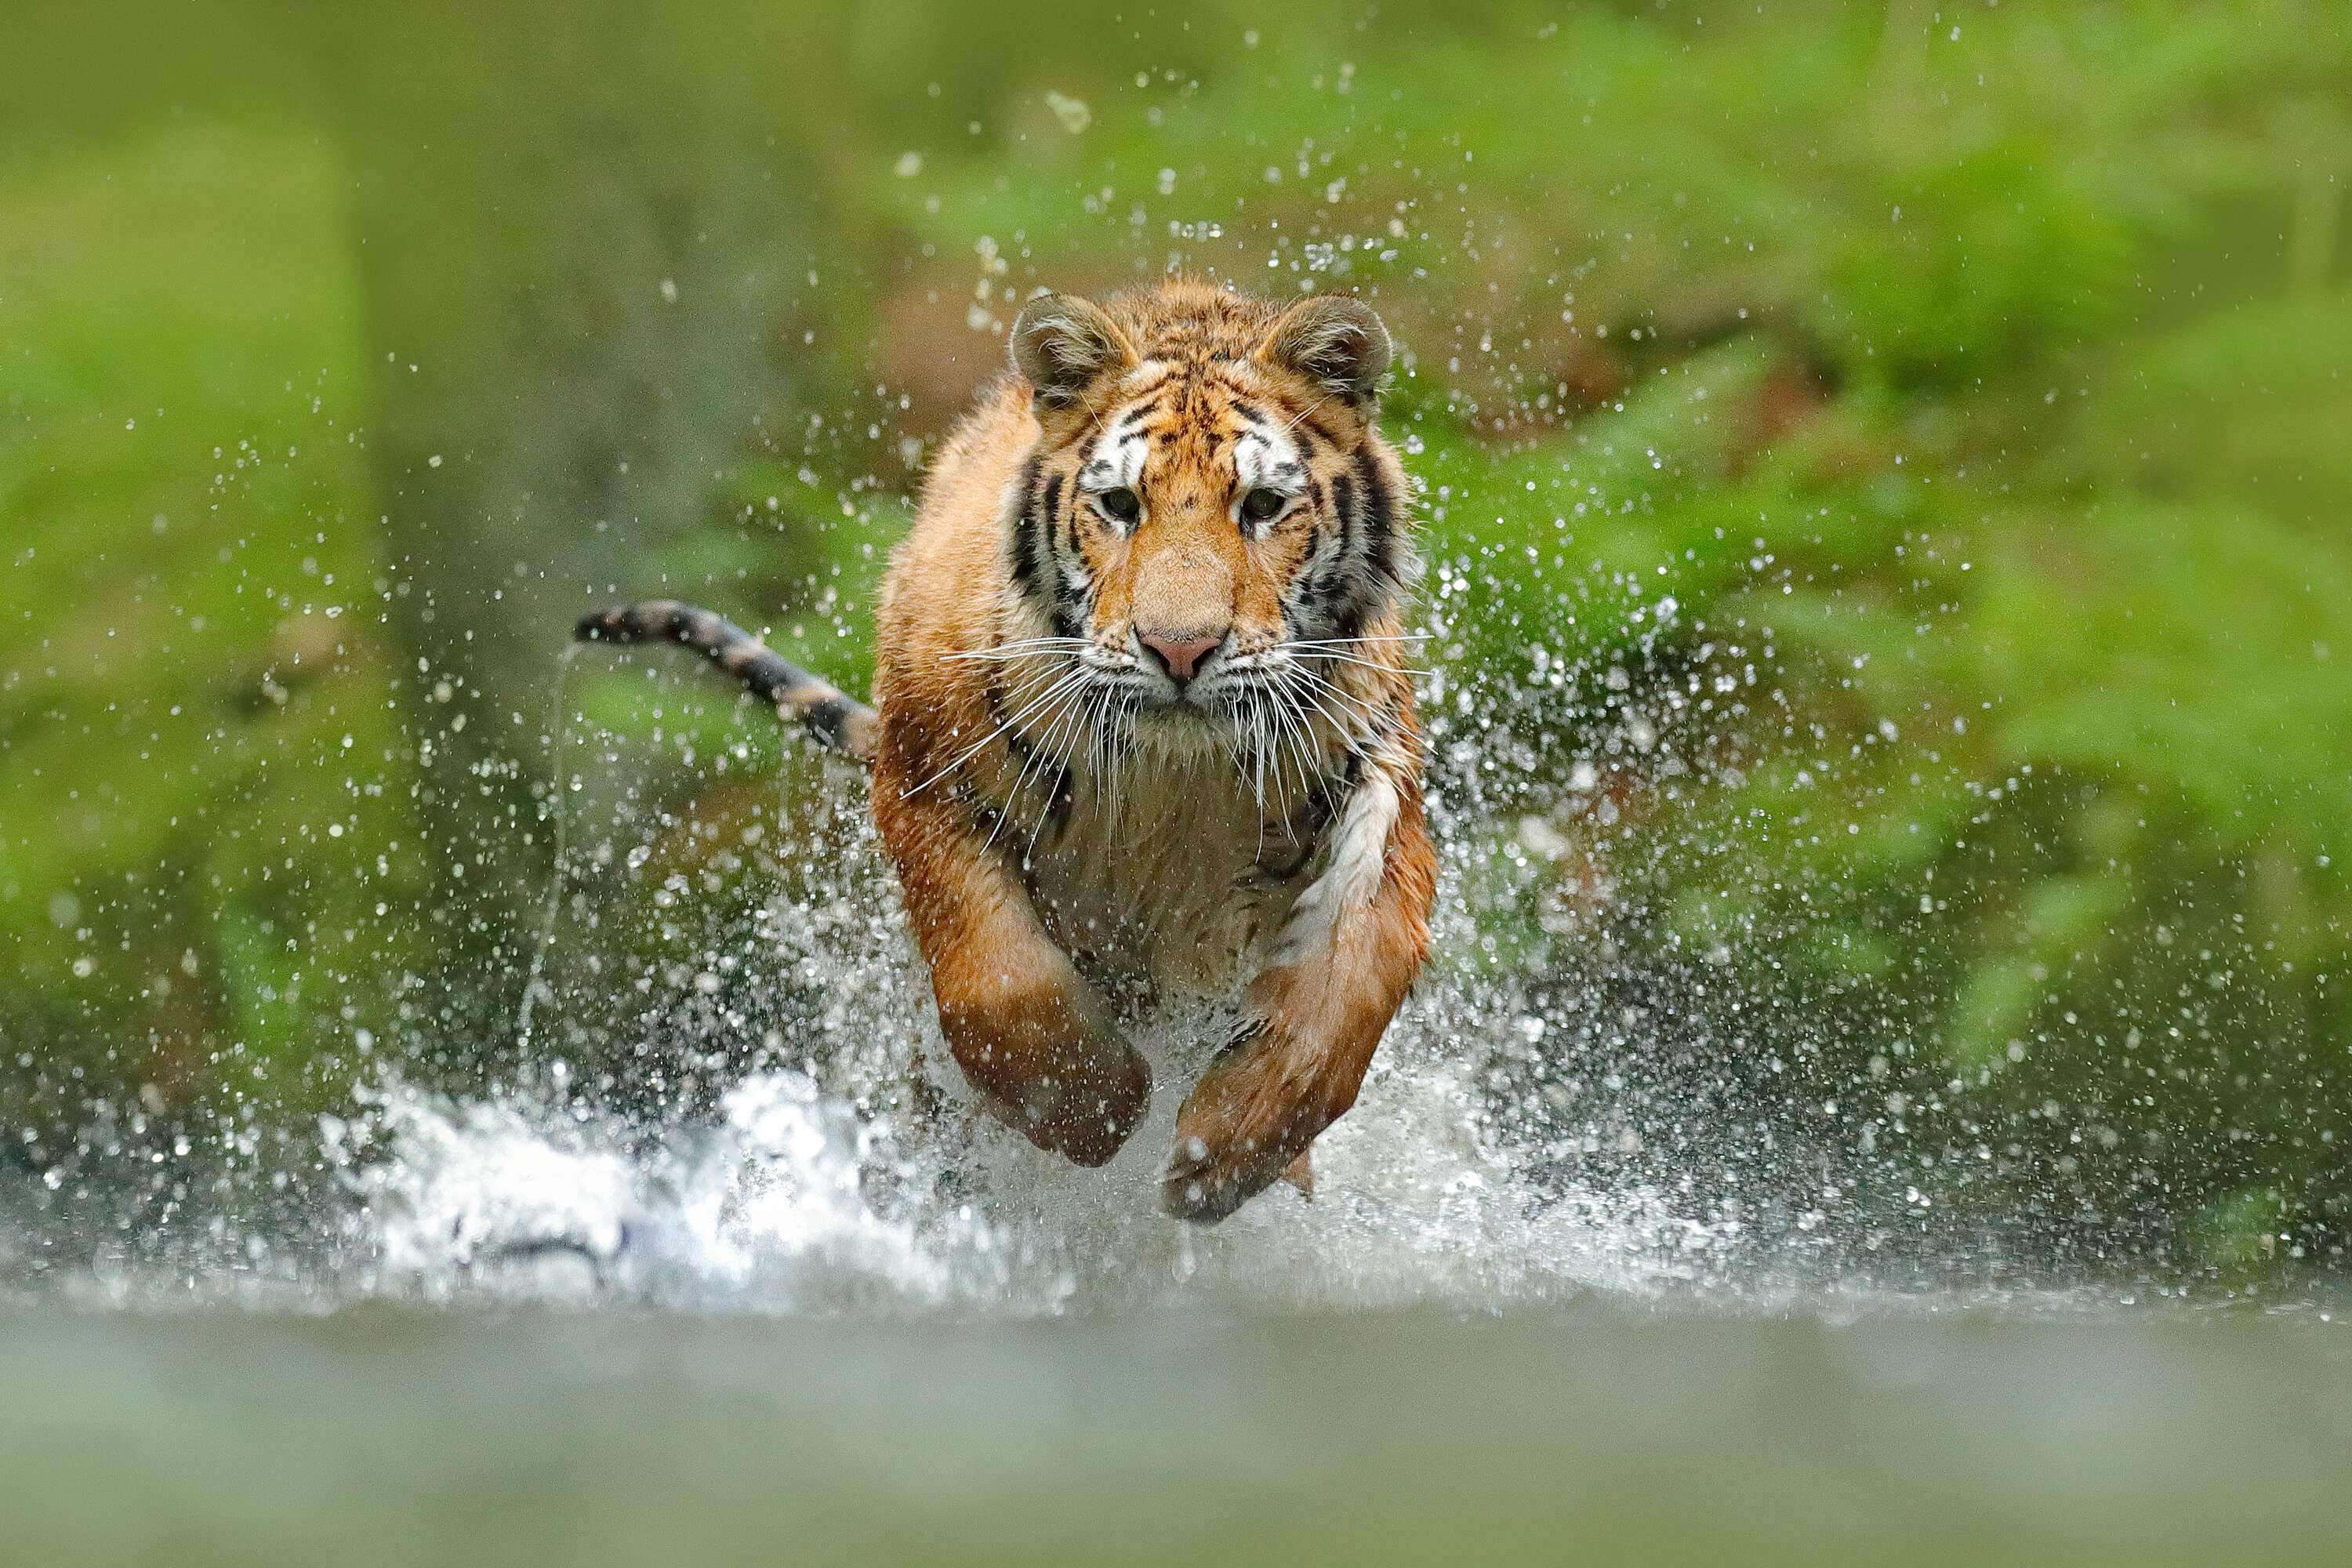 tiger leaping through water